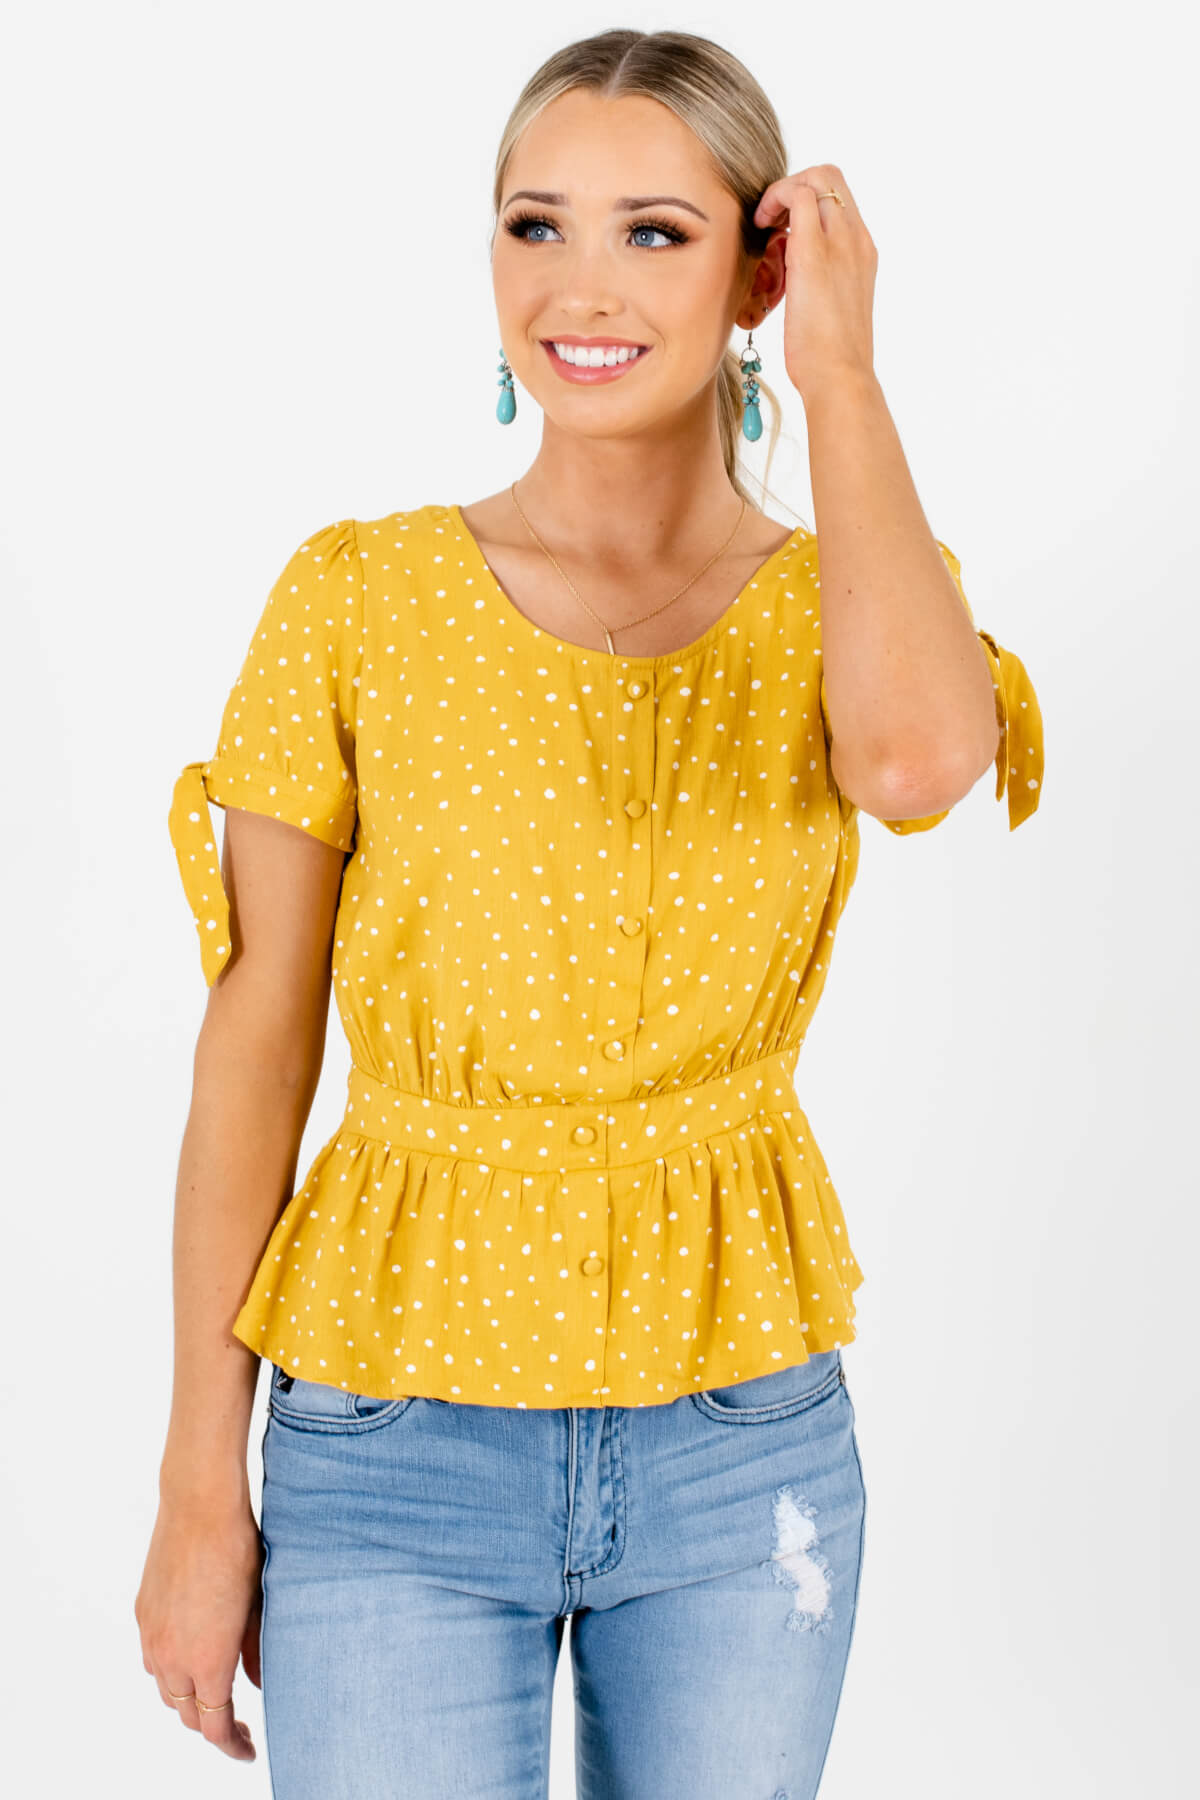 Mustard Yellow Decorative Button Boutique Tops for Women